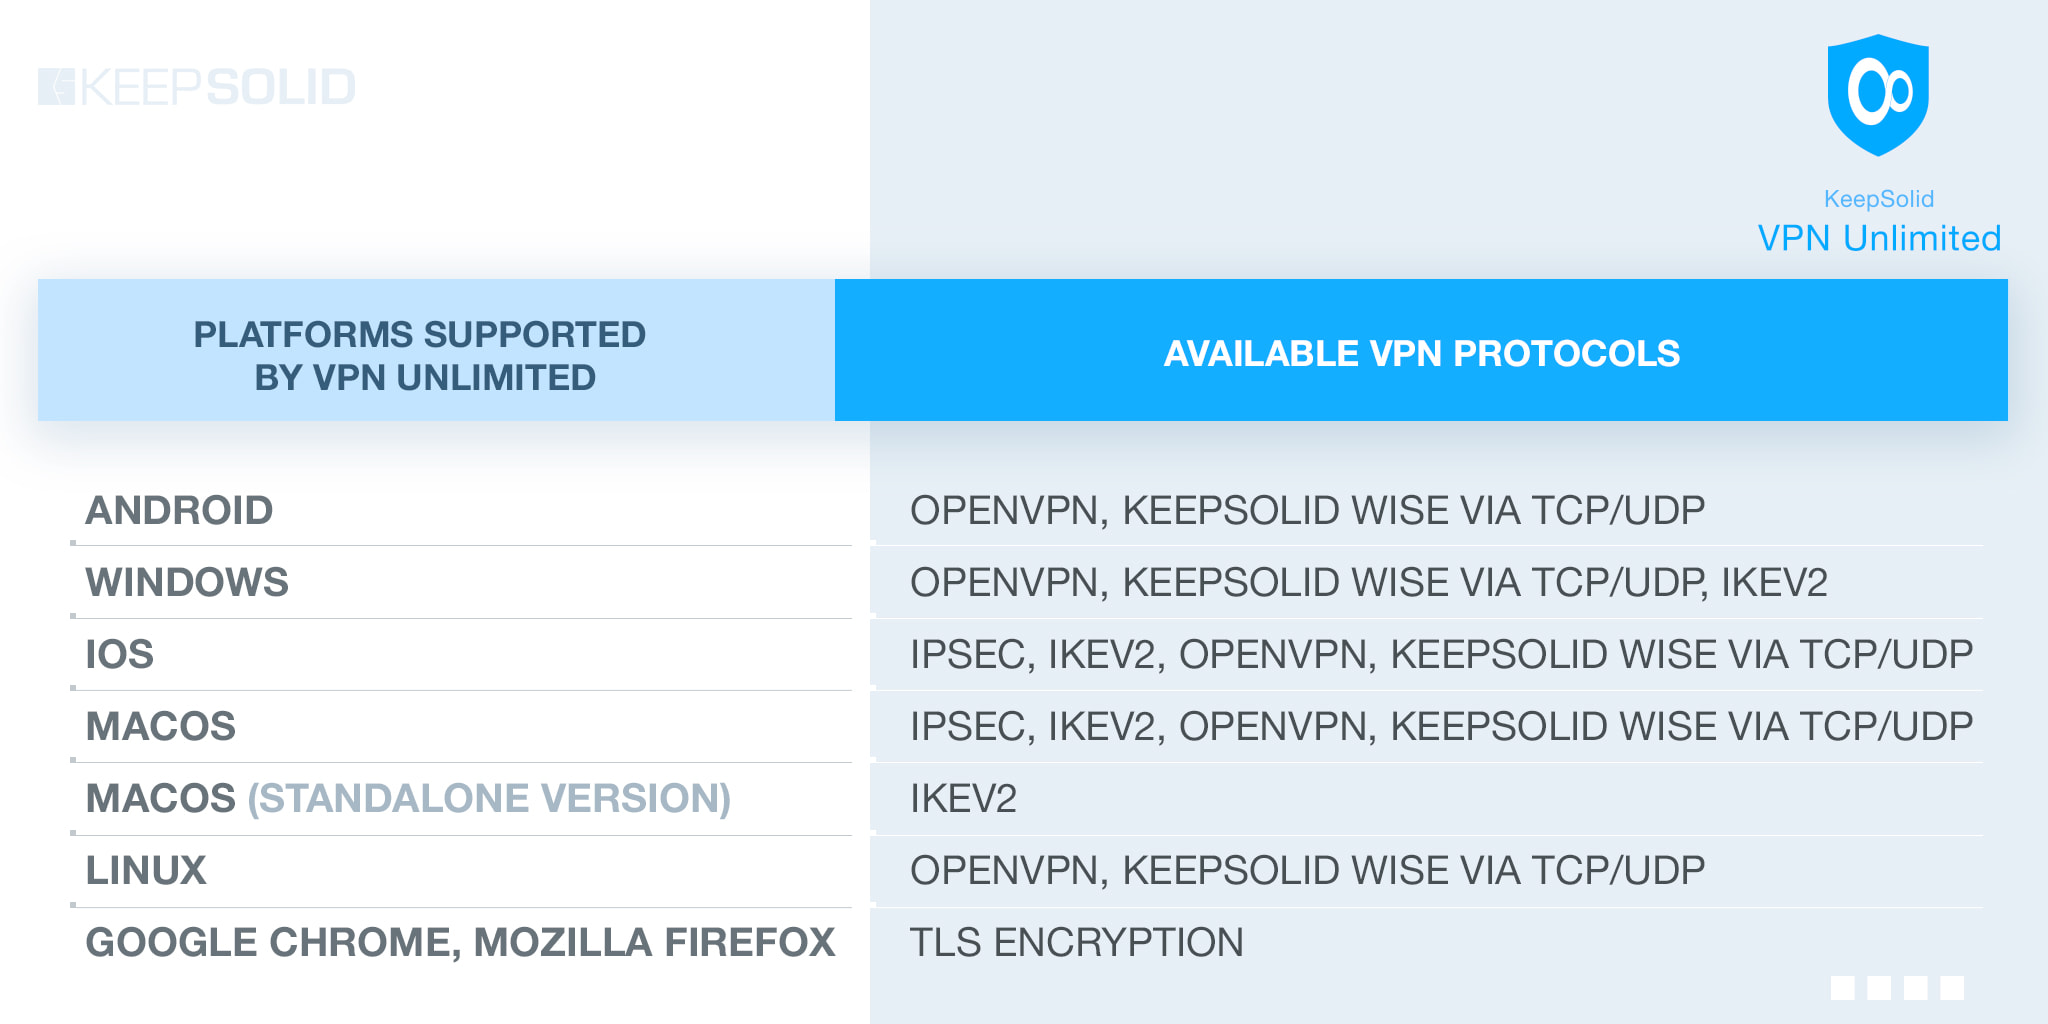 VPN protocols available on KeepSolid VPN Unlimited